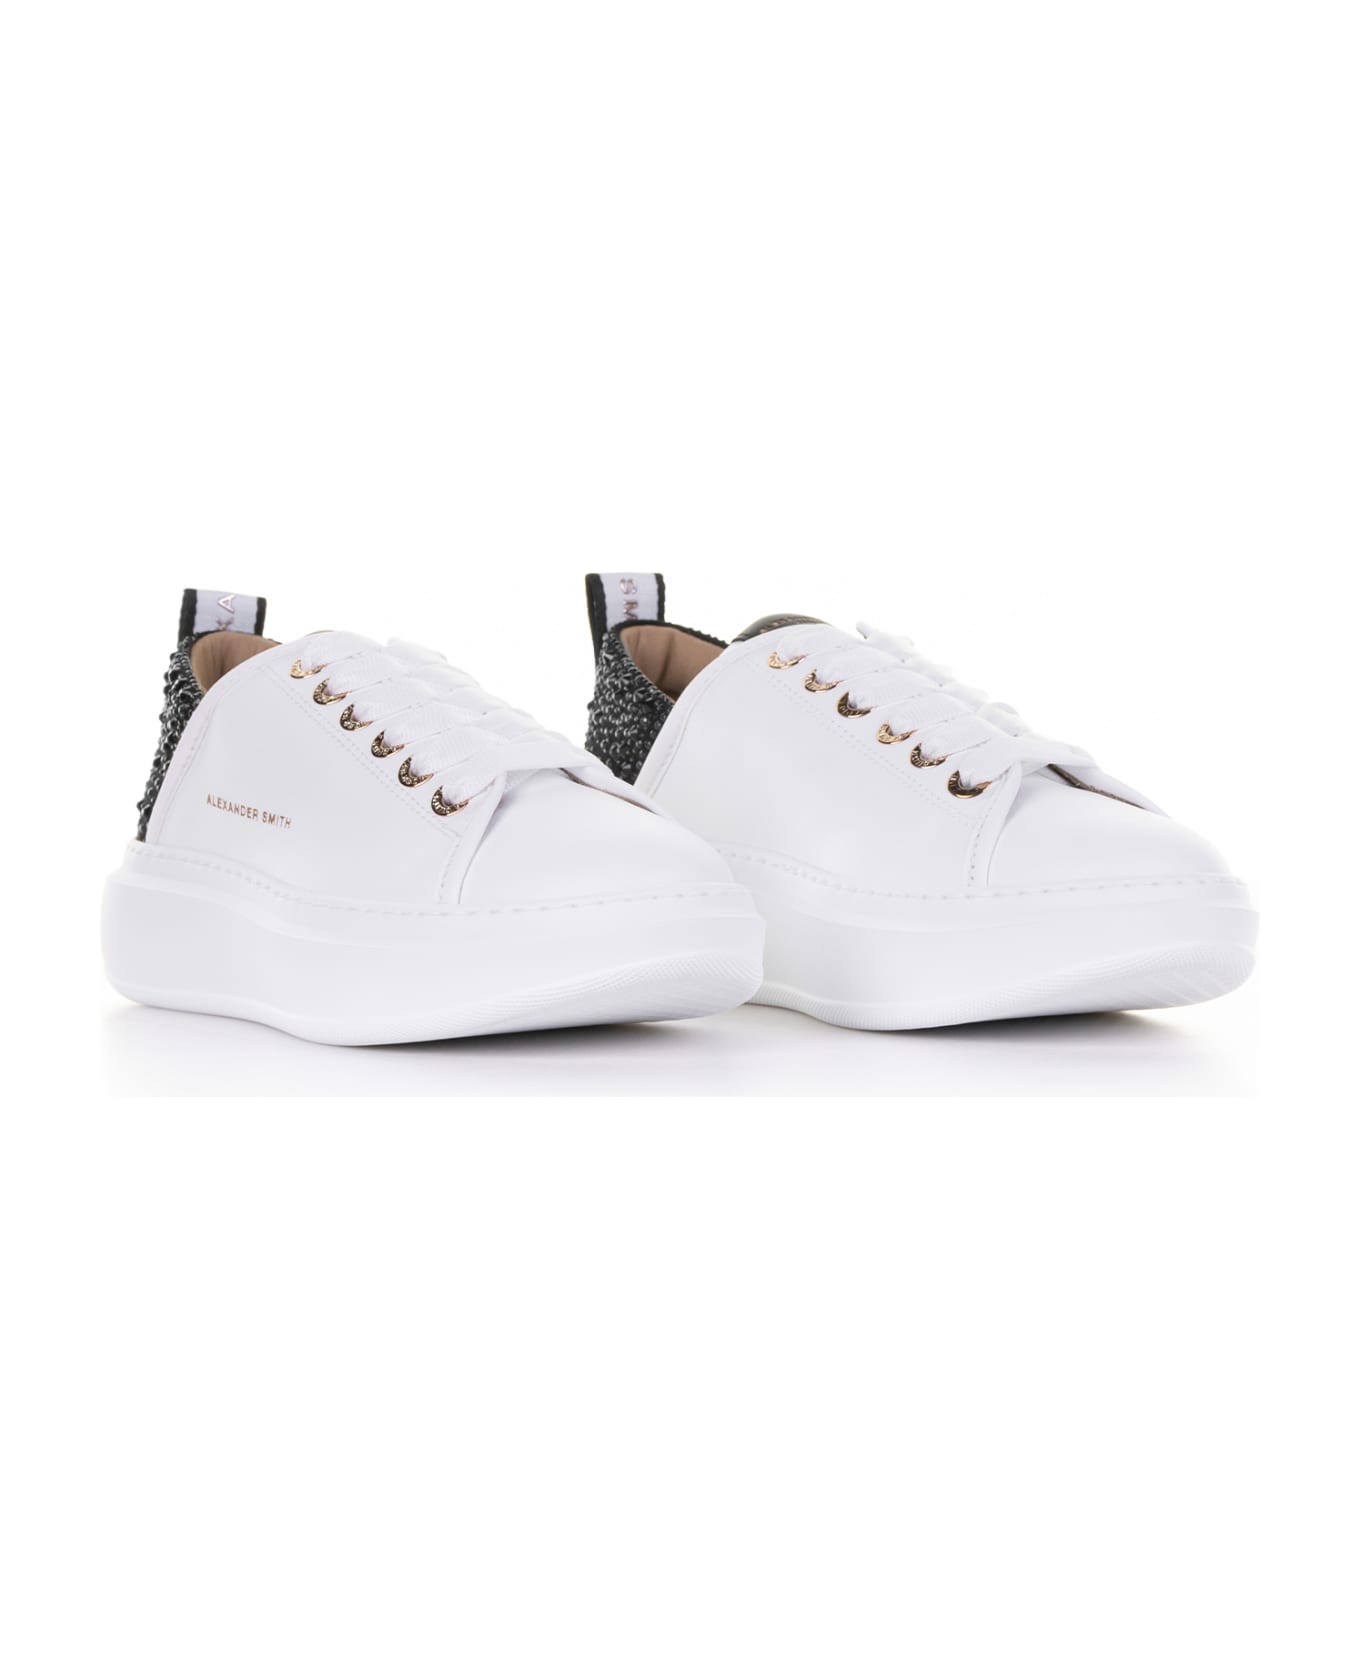 Alexander Smith London Wembley Sneaker In Leather And Rhinestones - WHITE BLACK